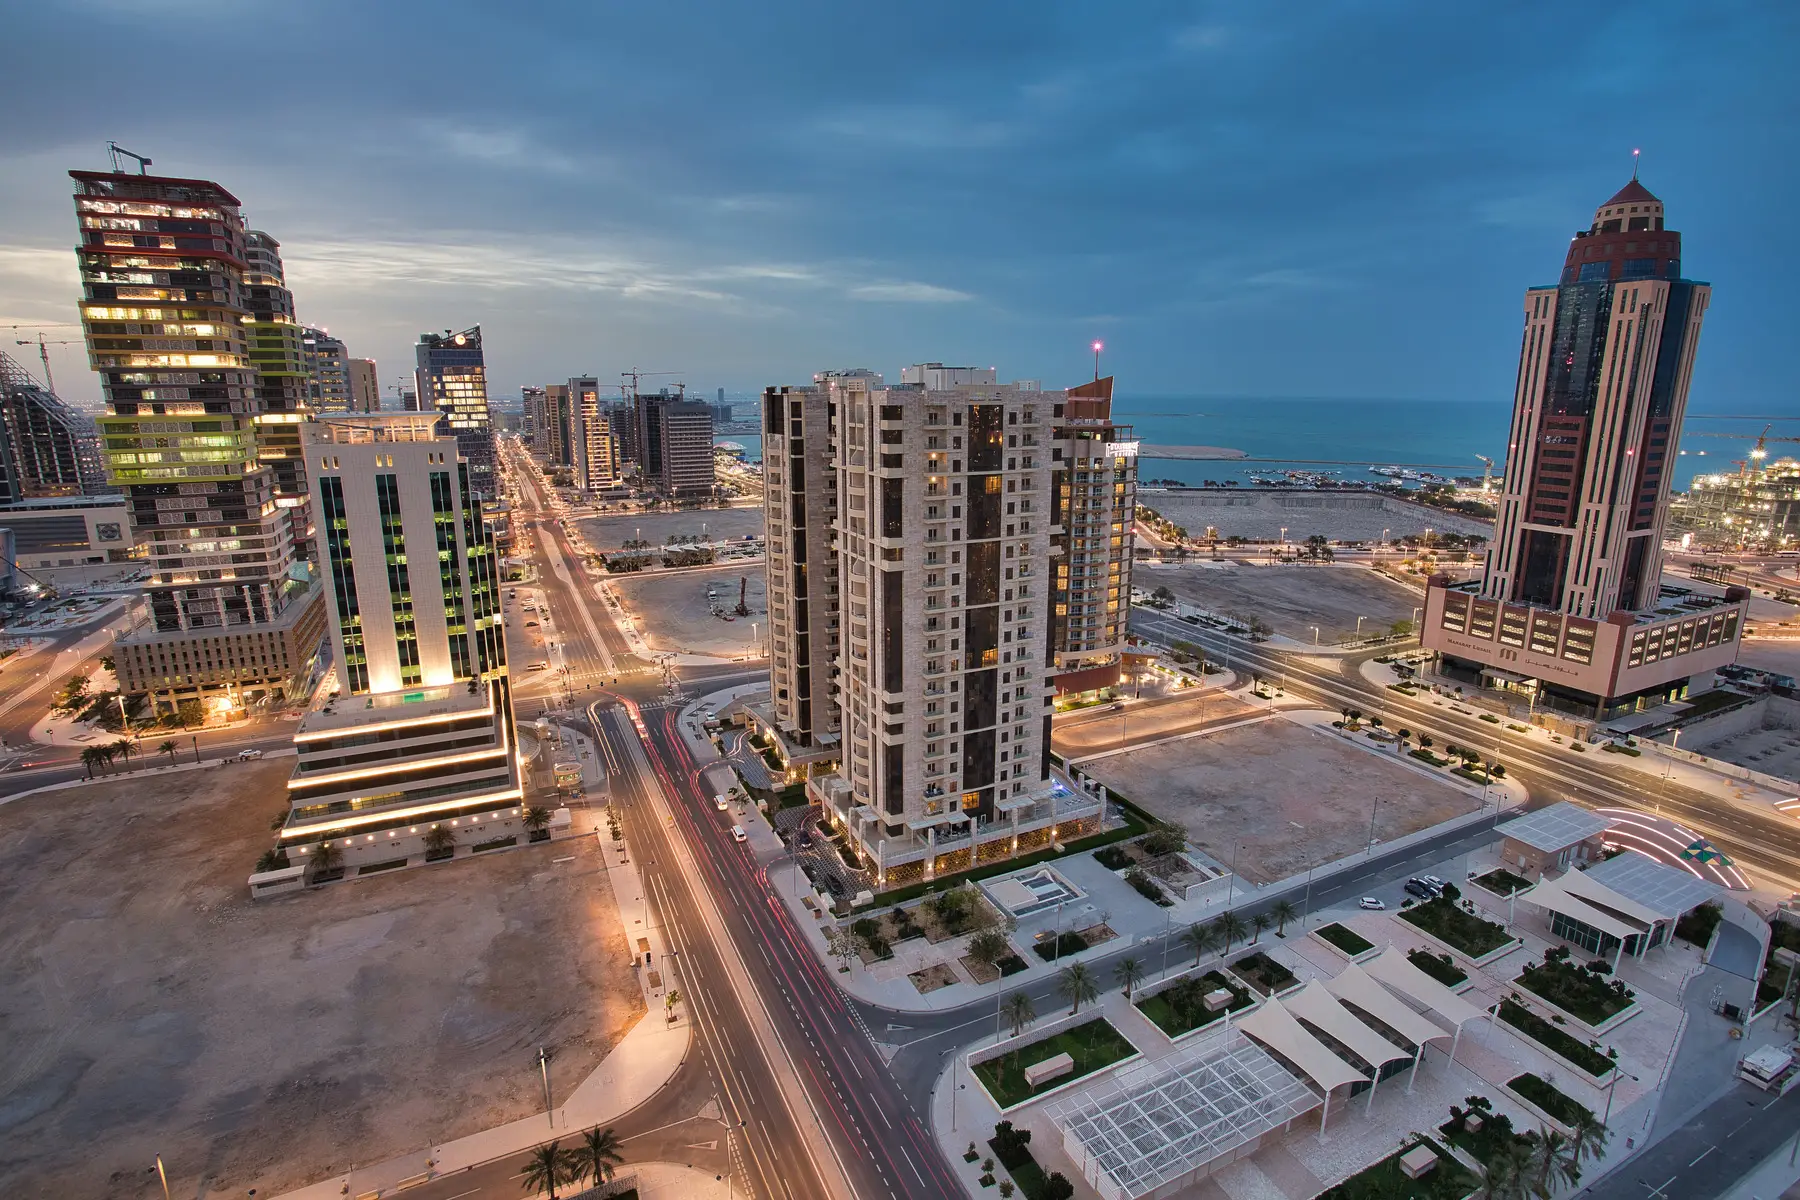 Apartment buildings in Lusail